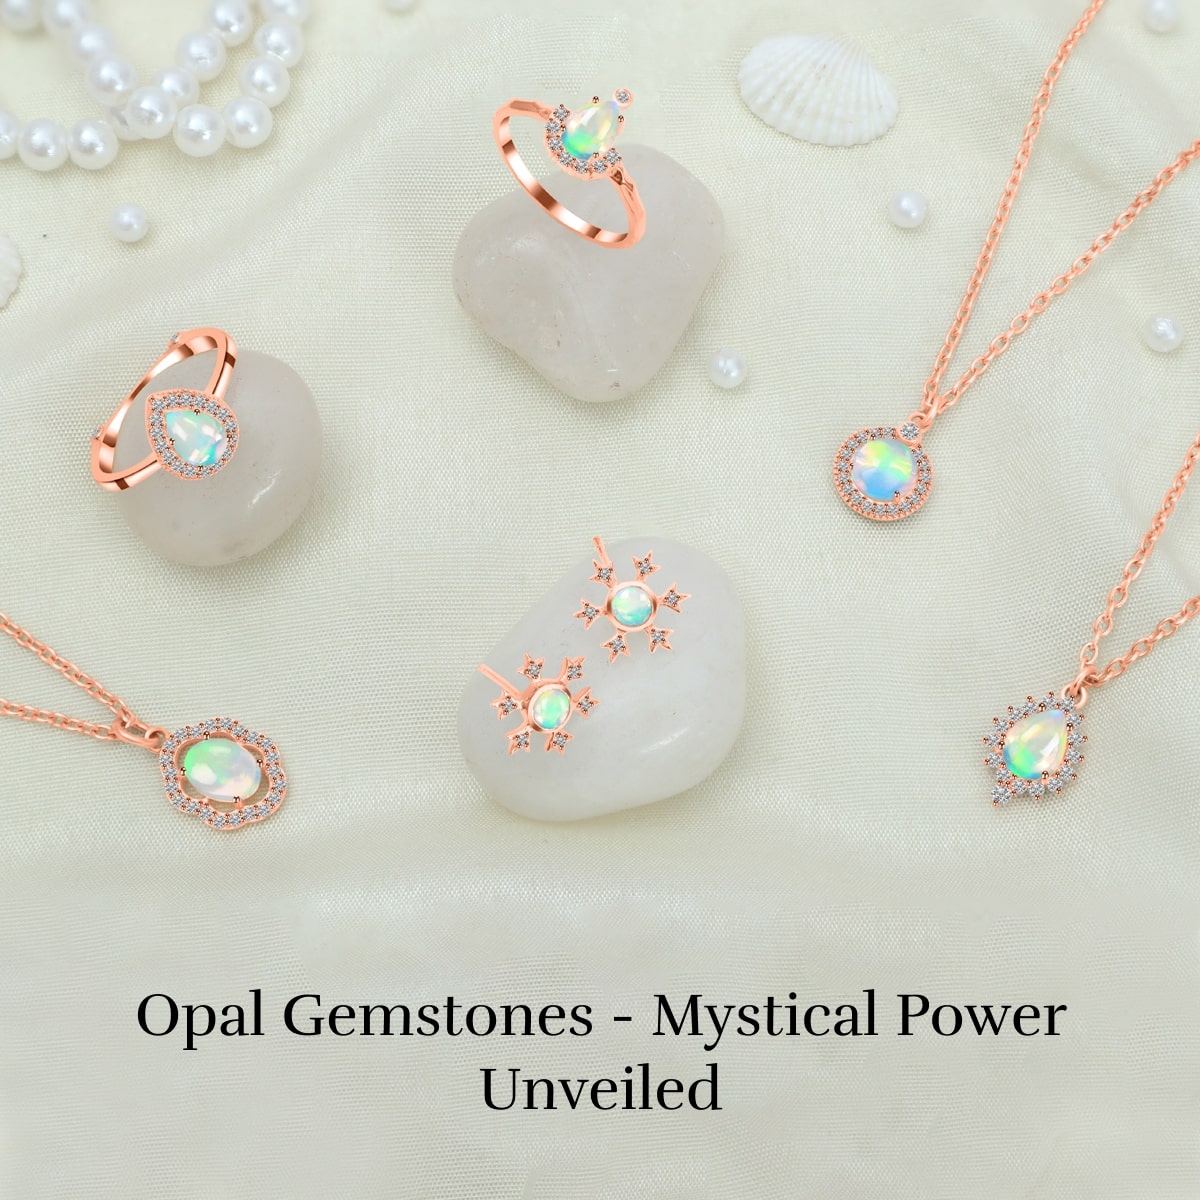 The Mystical Powers of Opal Gemstones